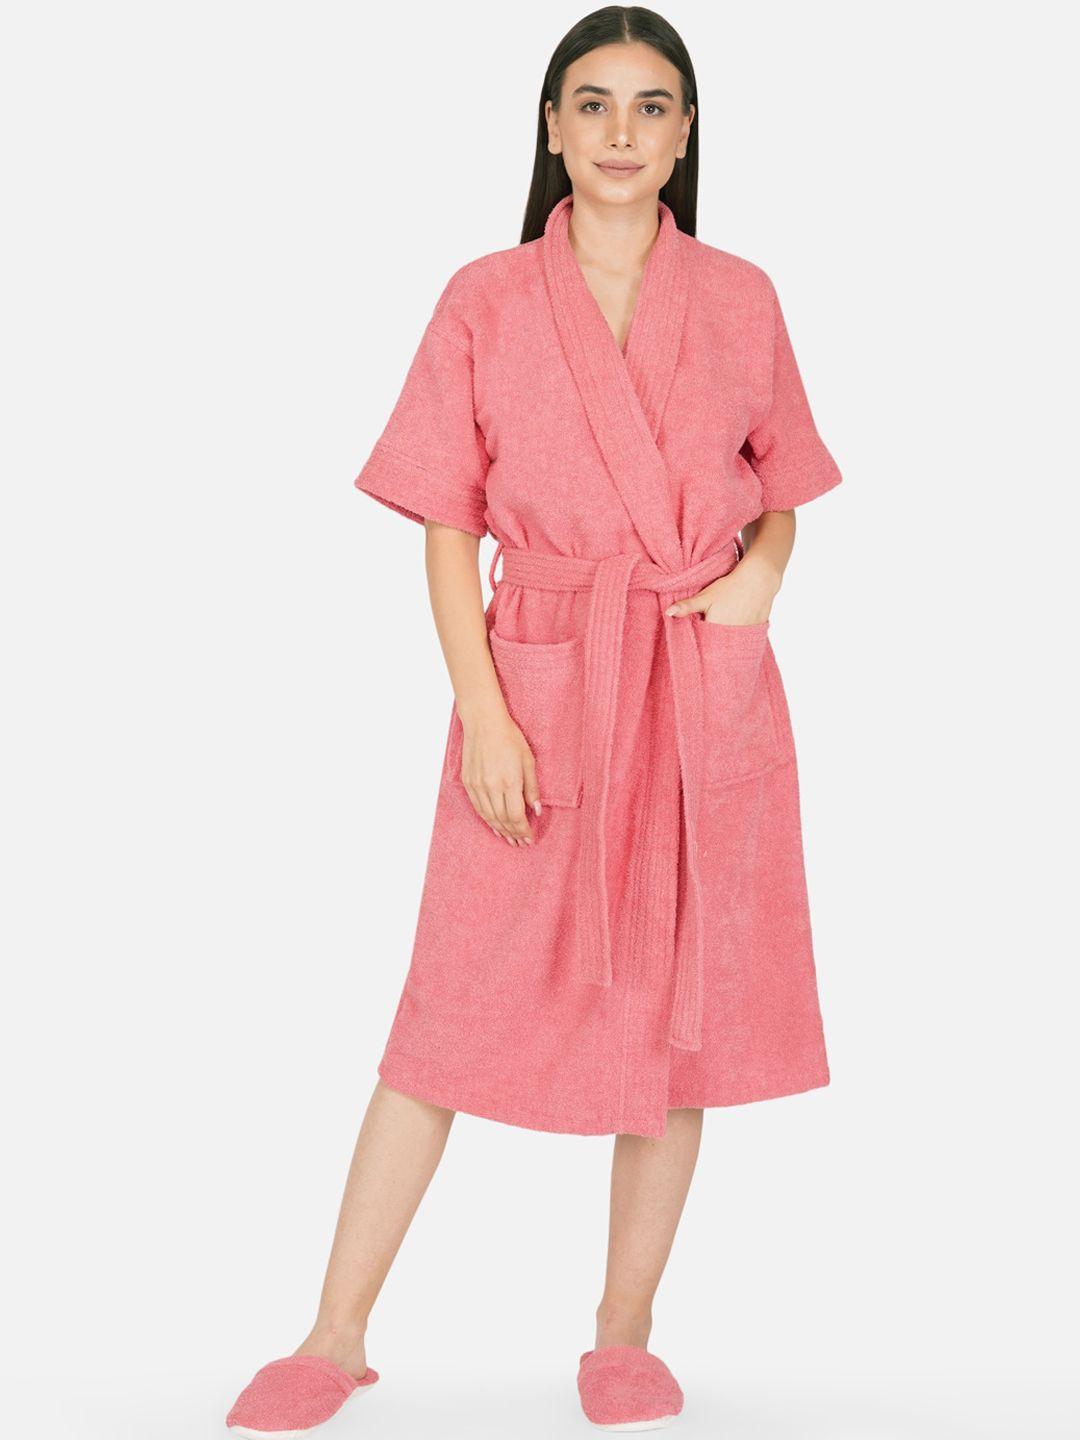 rangoli-unisex-coral-red-pure-cotton-400-gsm-bathrobe-with-room-slippers